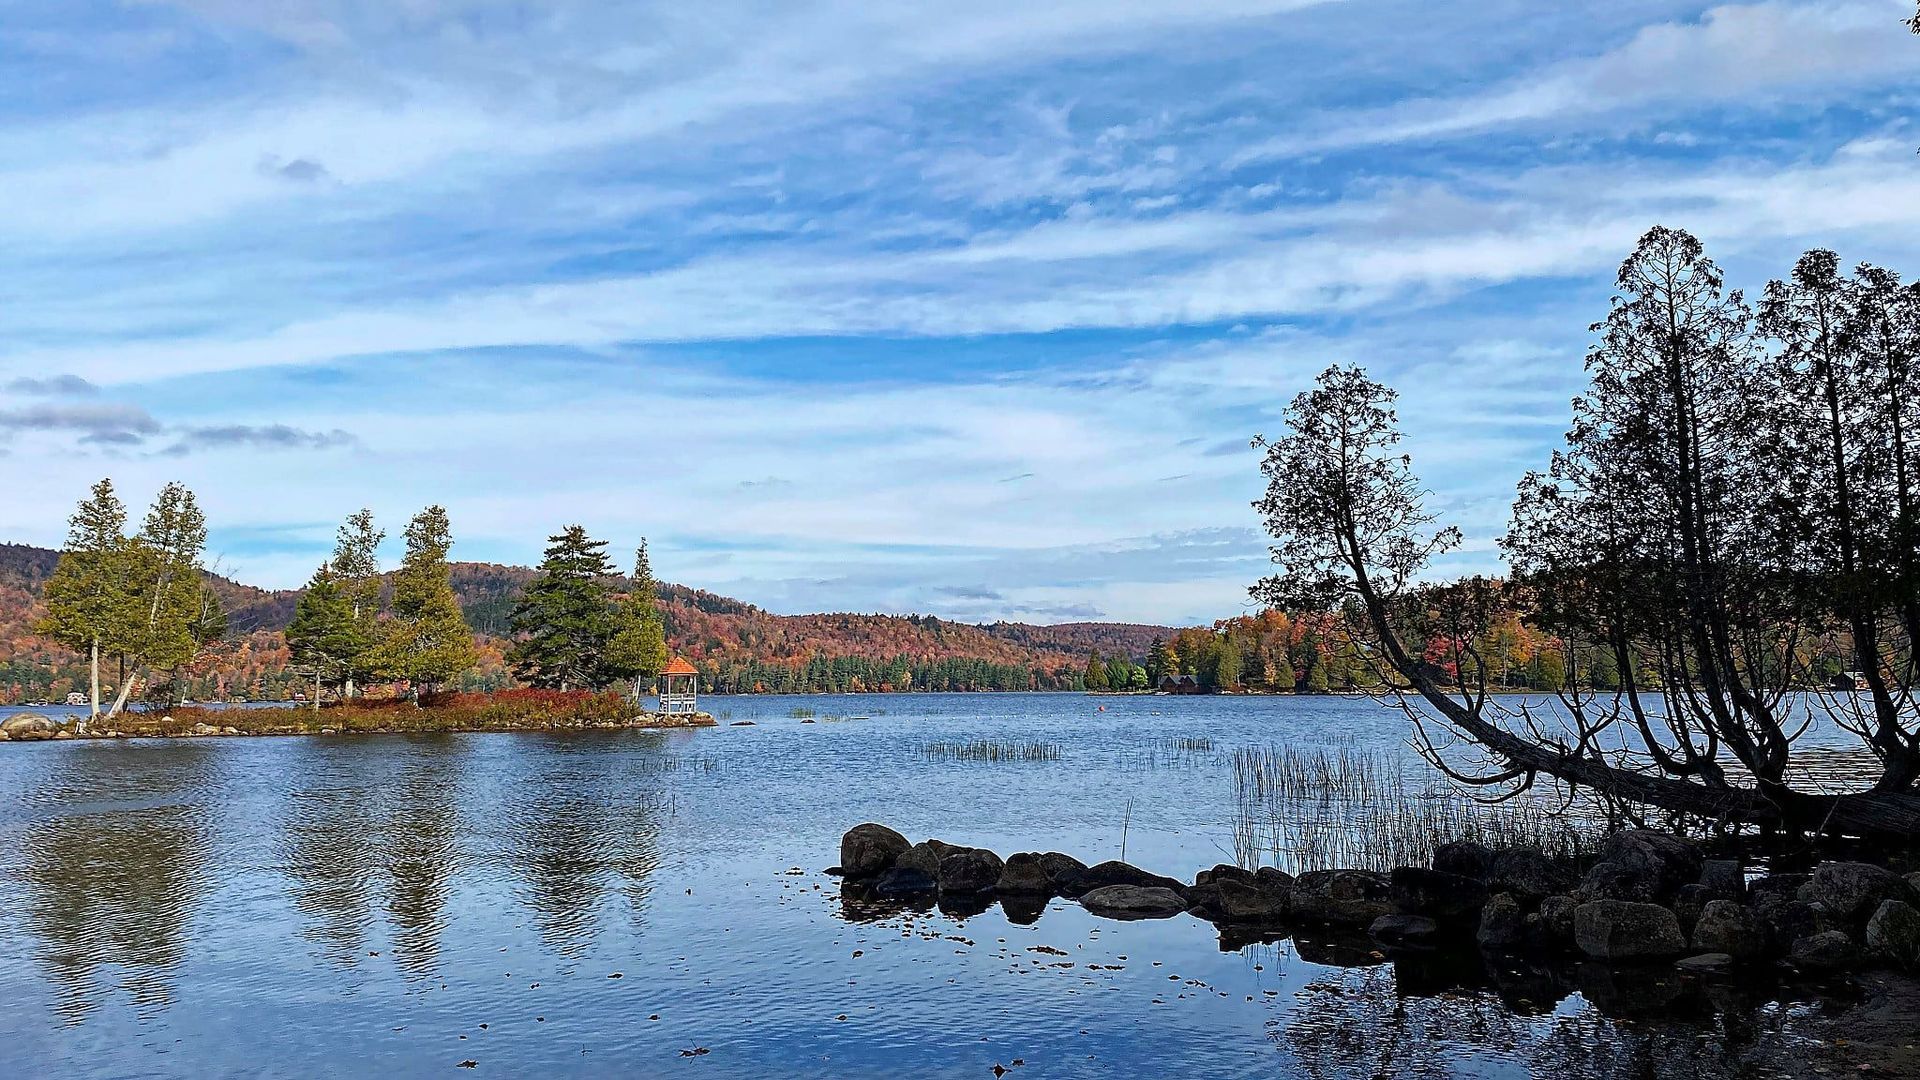 view of a lake with fall foliage